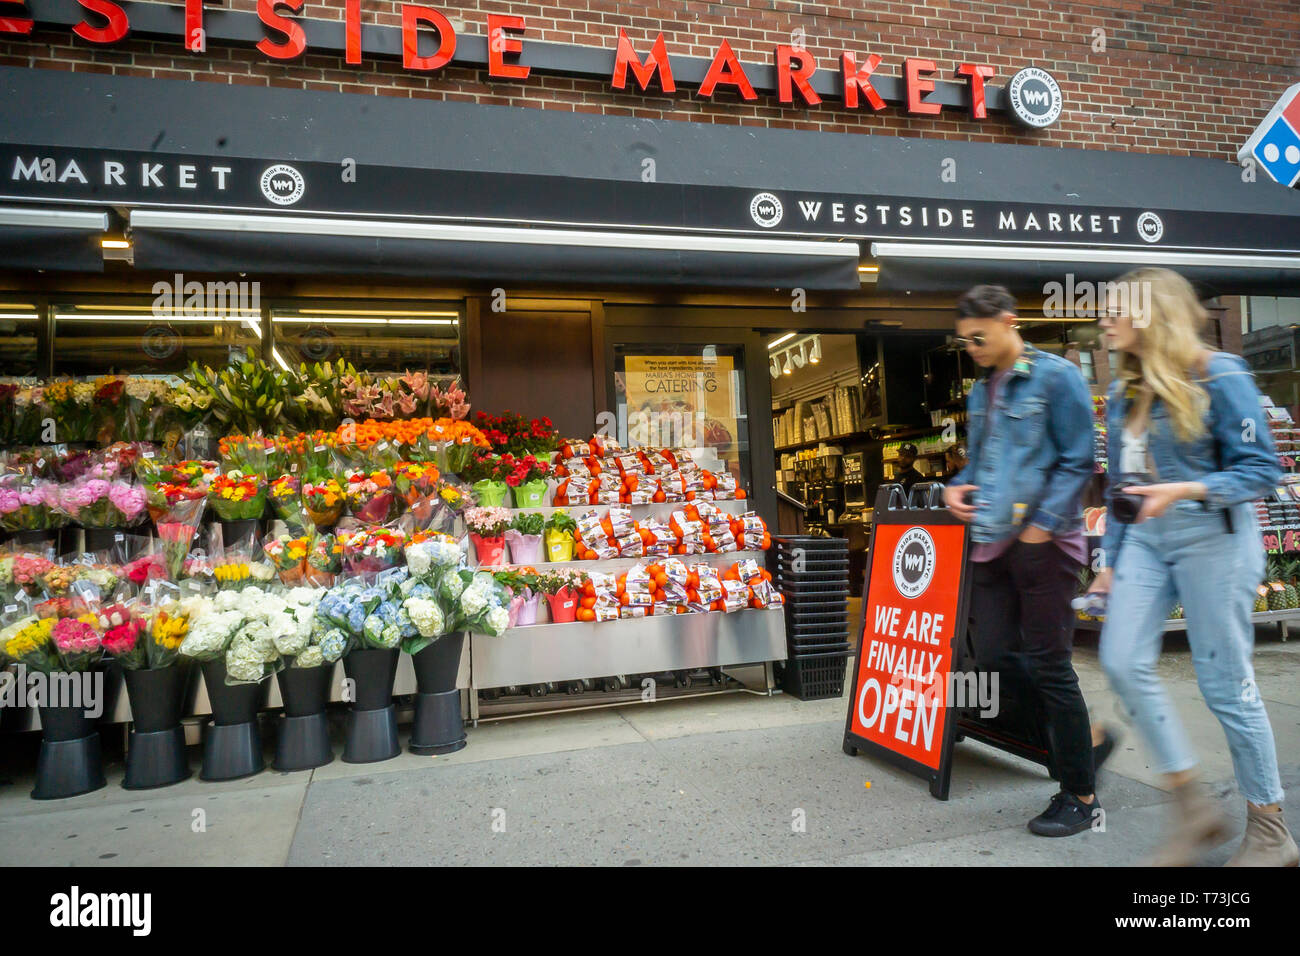 Another Branch Of The Westside Market Chain Of Supermarkets Opens